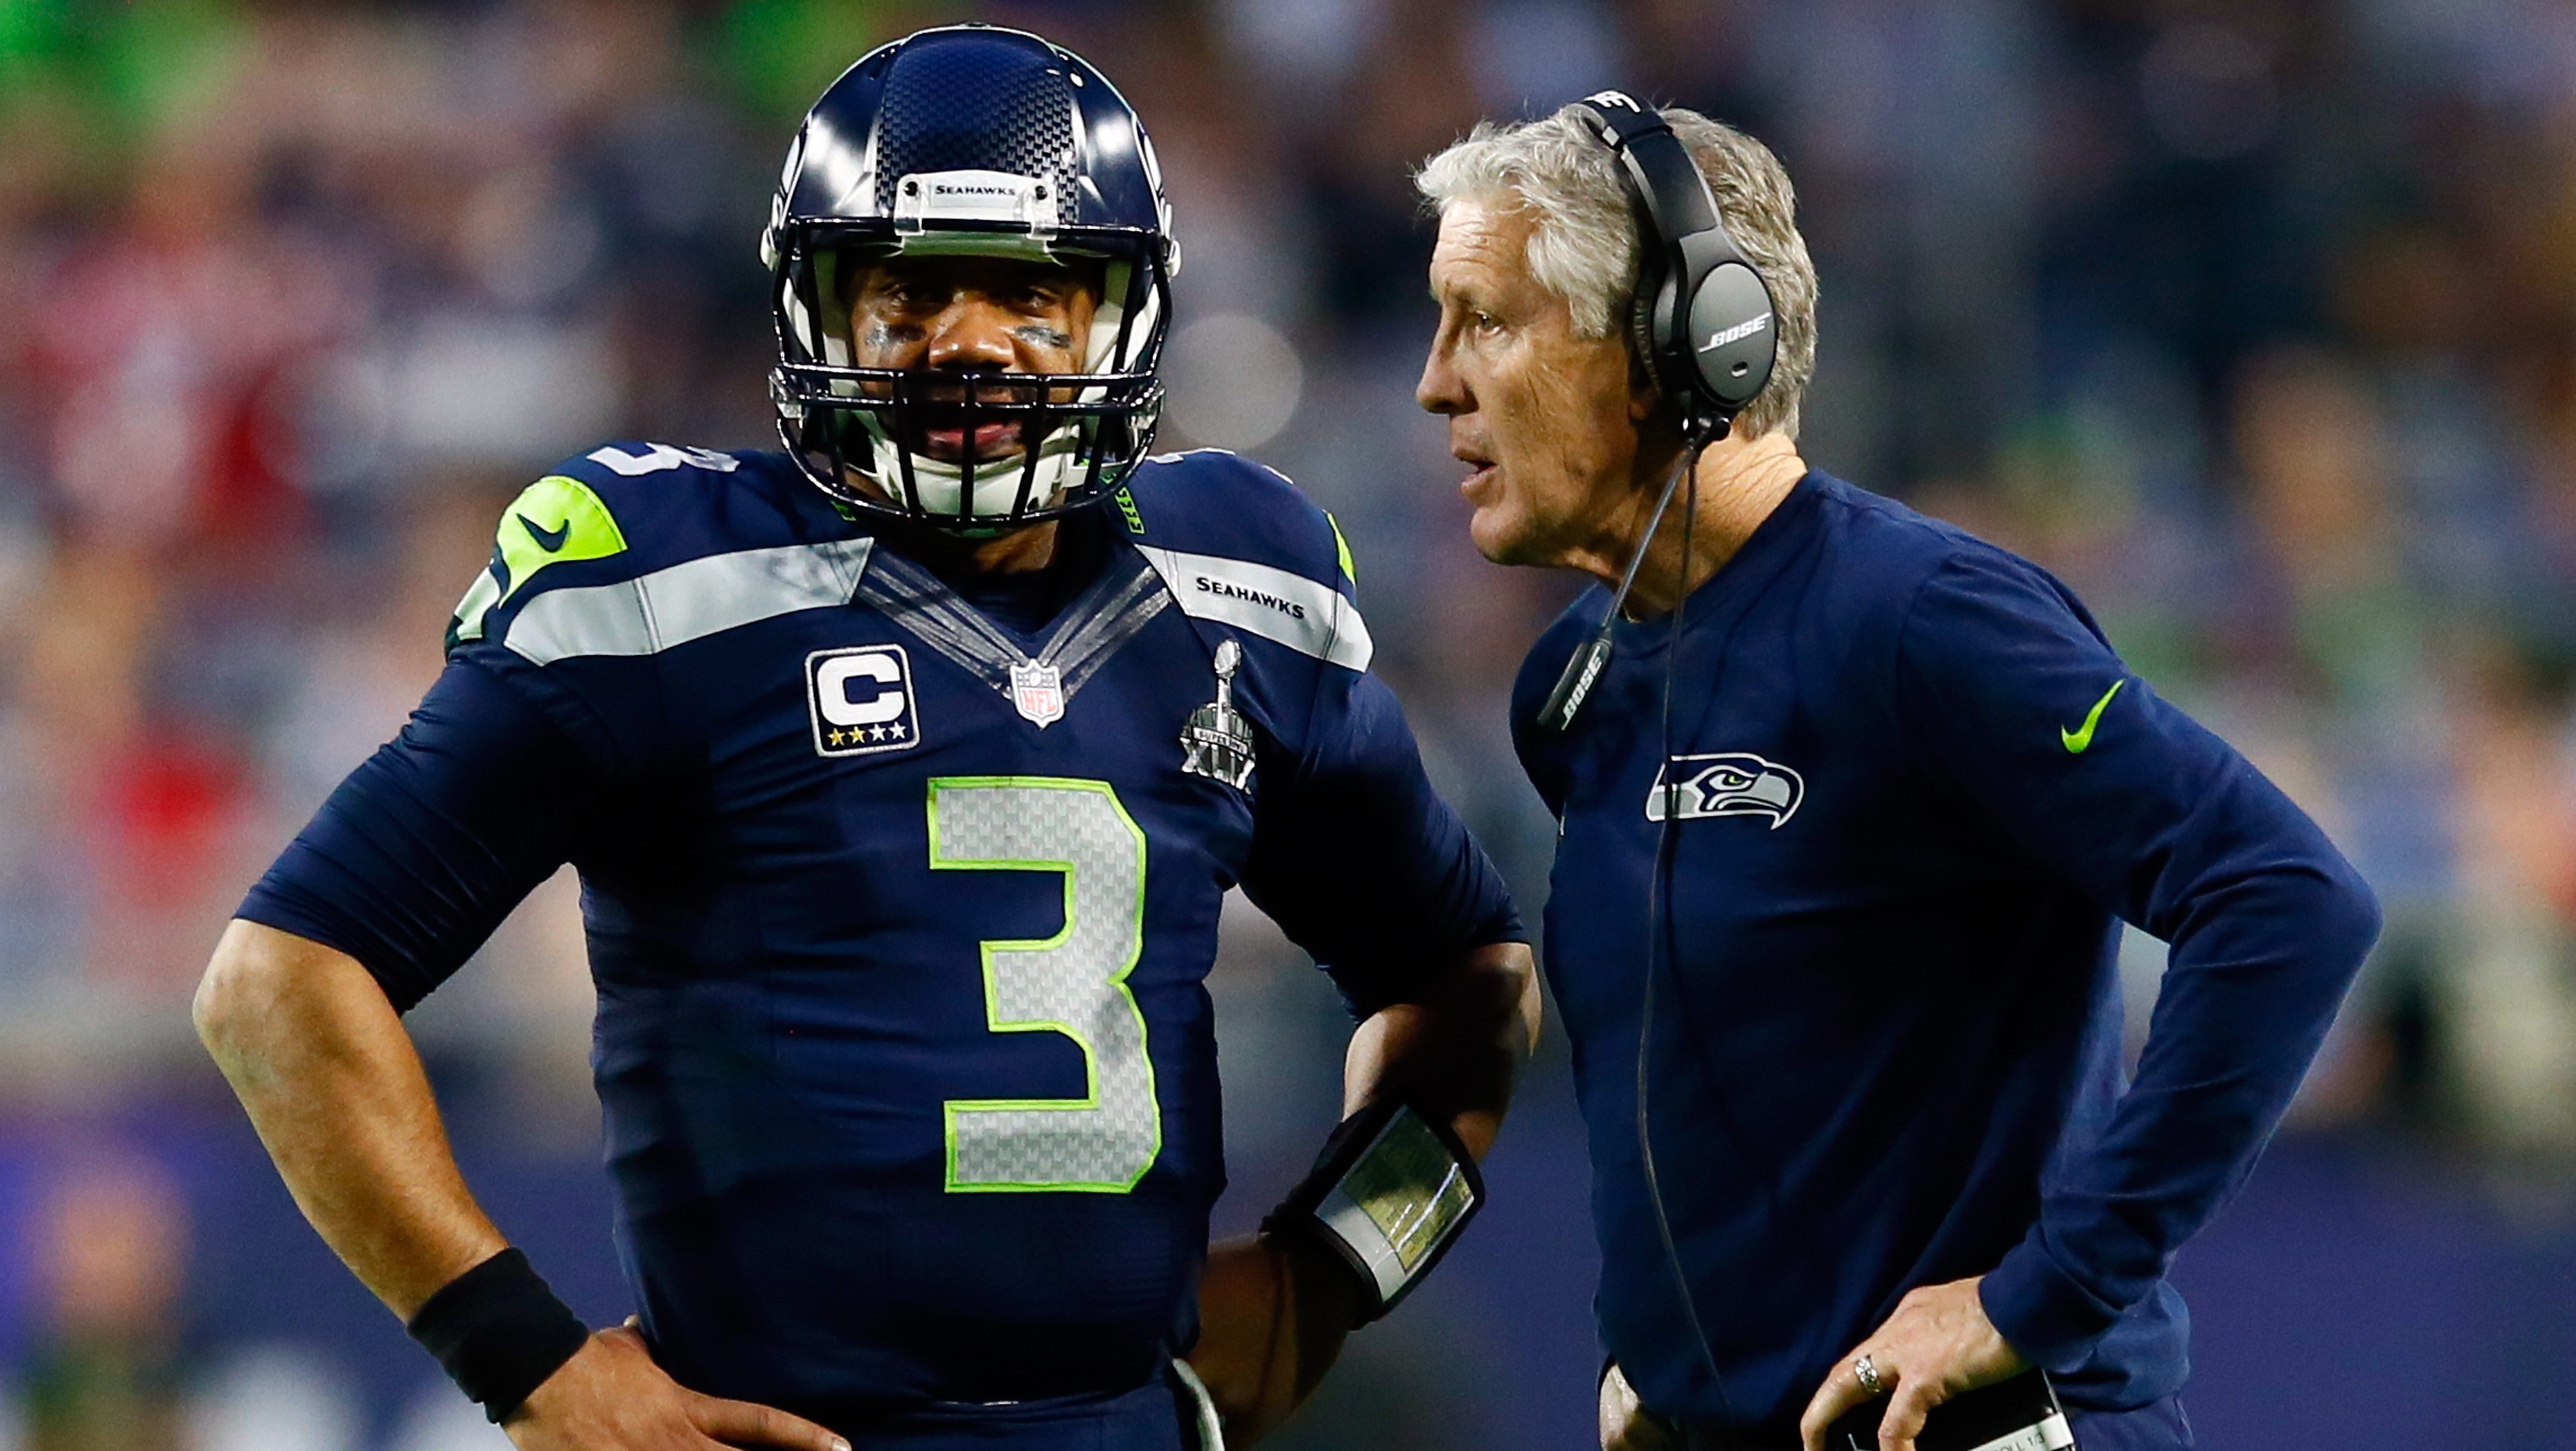 Seahawks' Pete Carroll Replacement Plan Starting to Take Shape With Interview Requests - Heavy.com